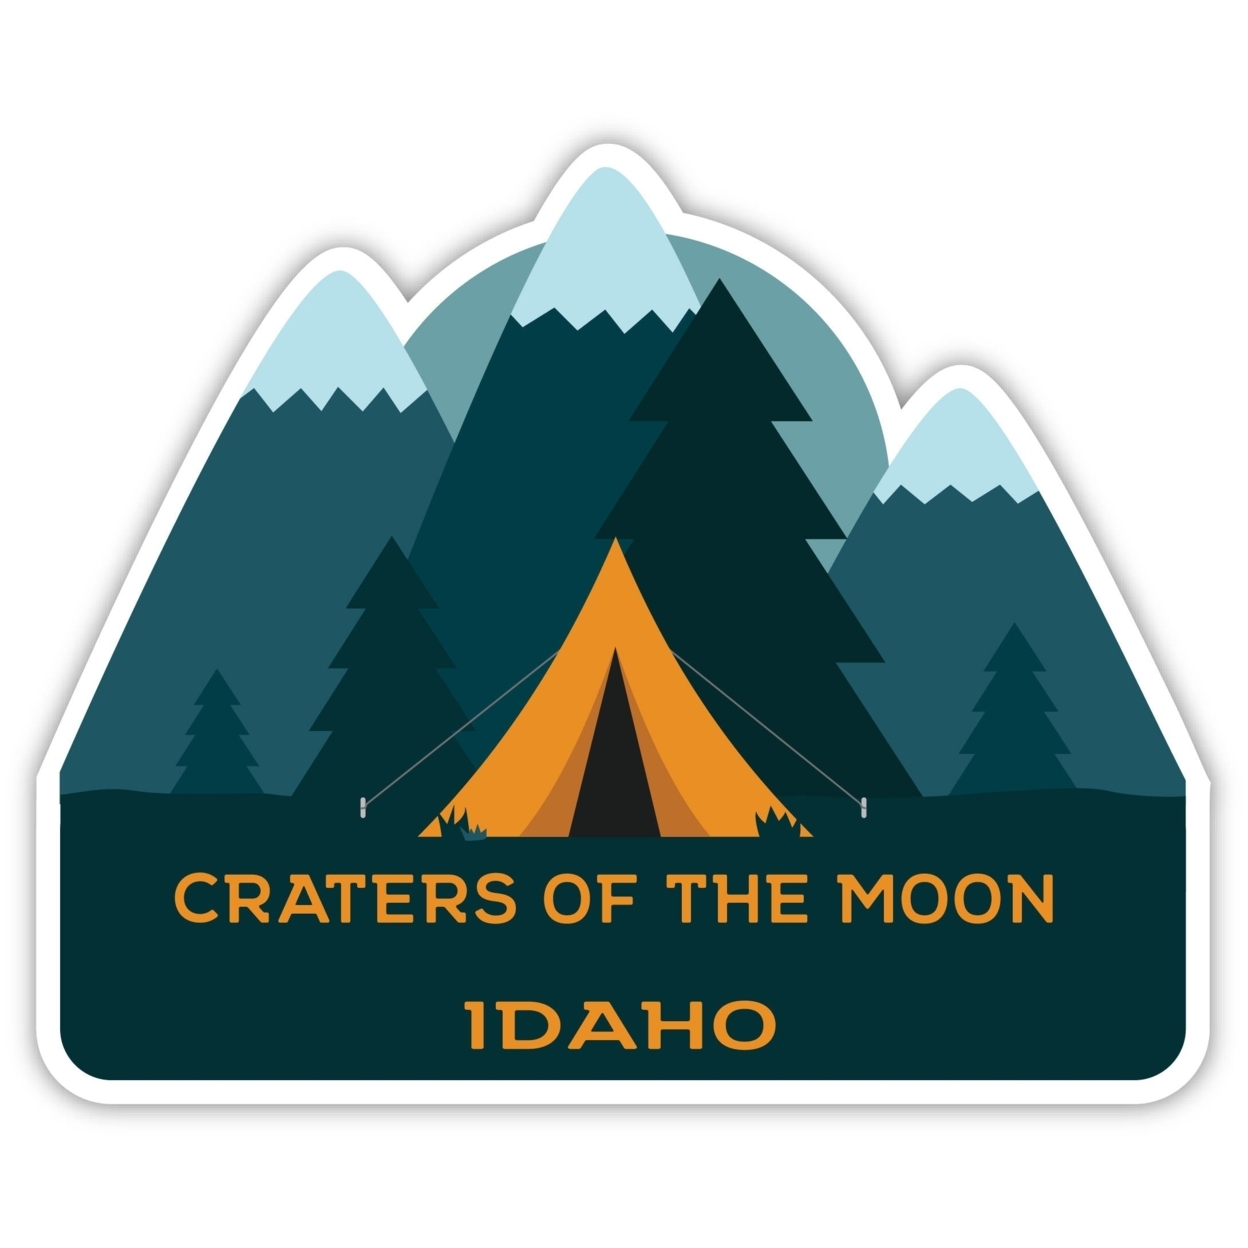 Craters Of The Moon Idaho Souvenir Decorative Stickers (Choose Theme And Size) - Single Unit, 8-Inch, Tent